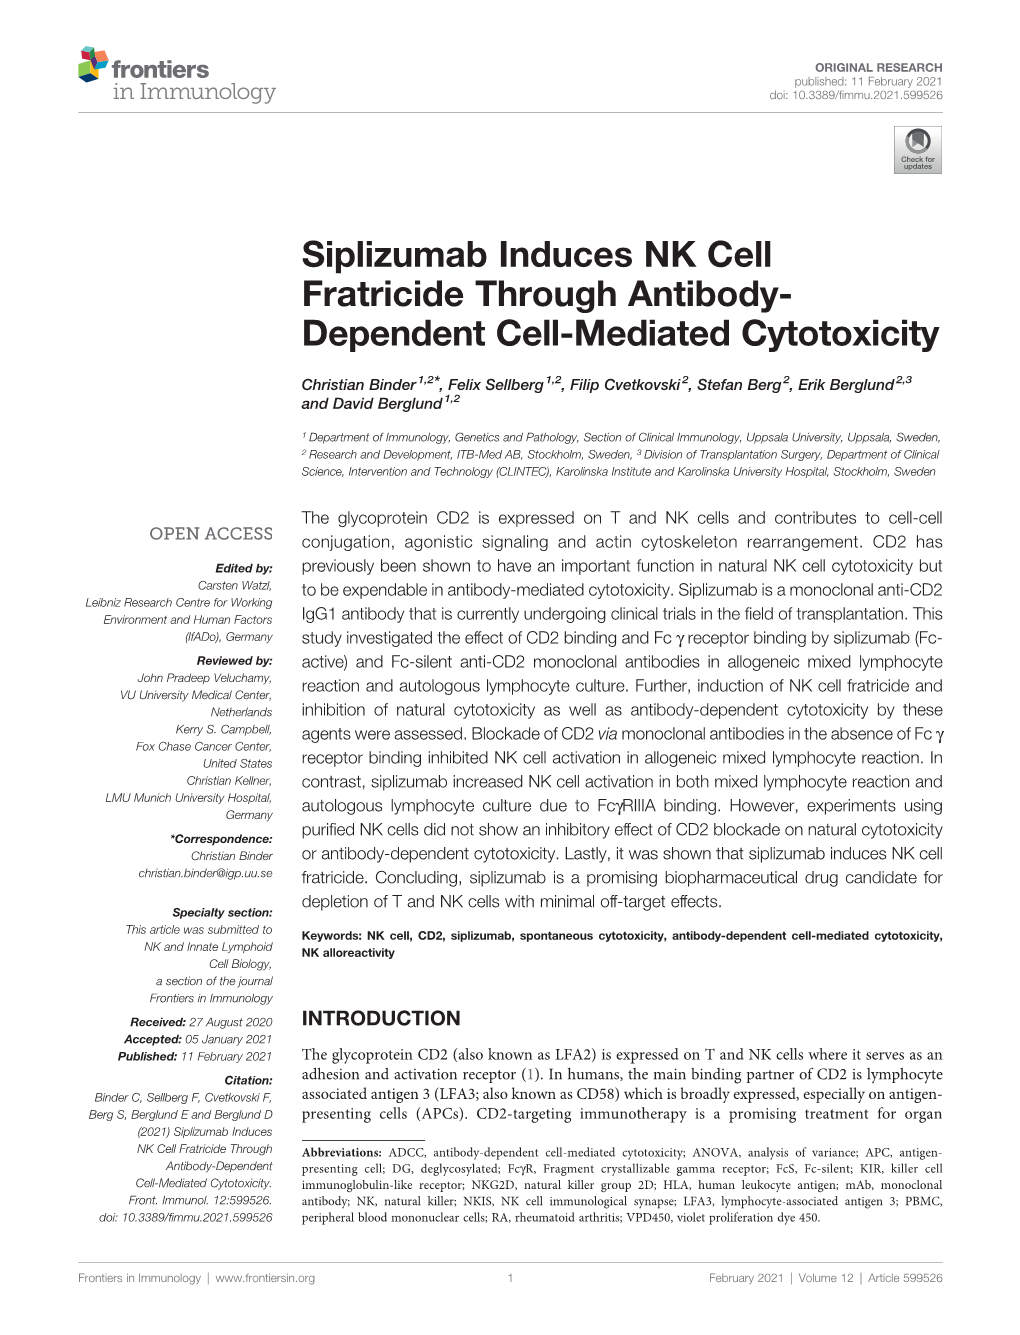 Siplizumab Induces NK Cell Fratricide Through Antibody-Dependent Cell